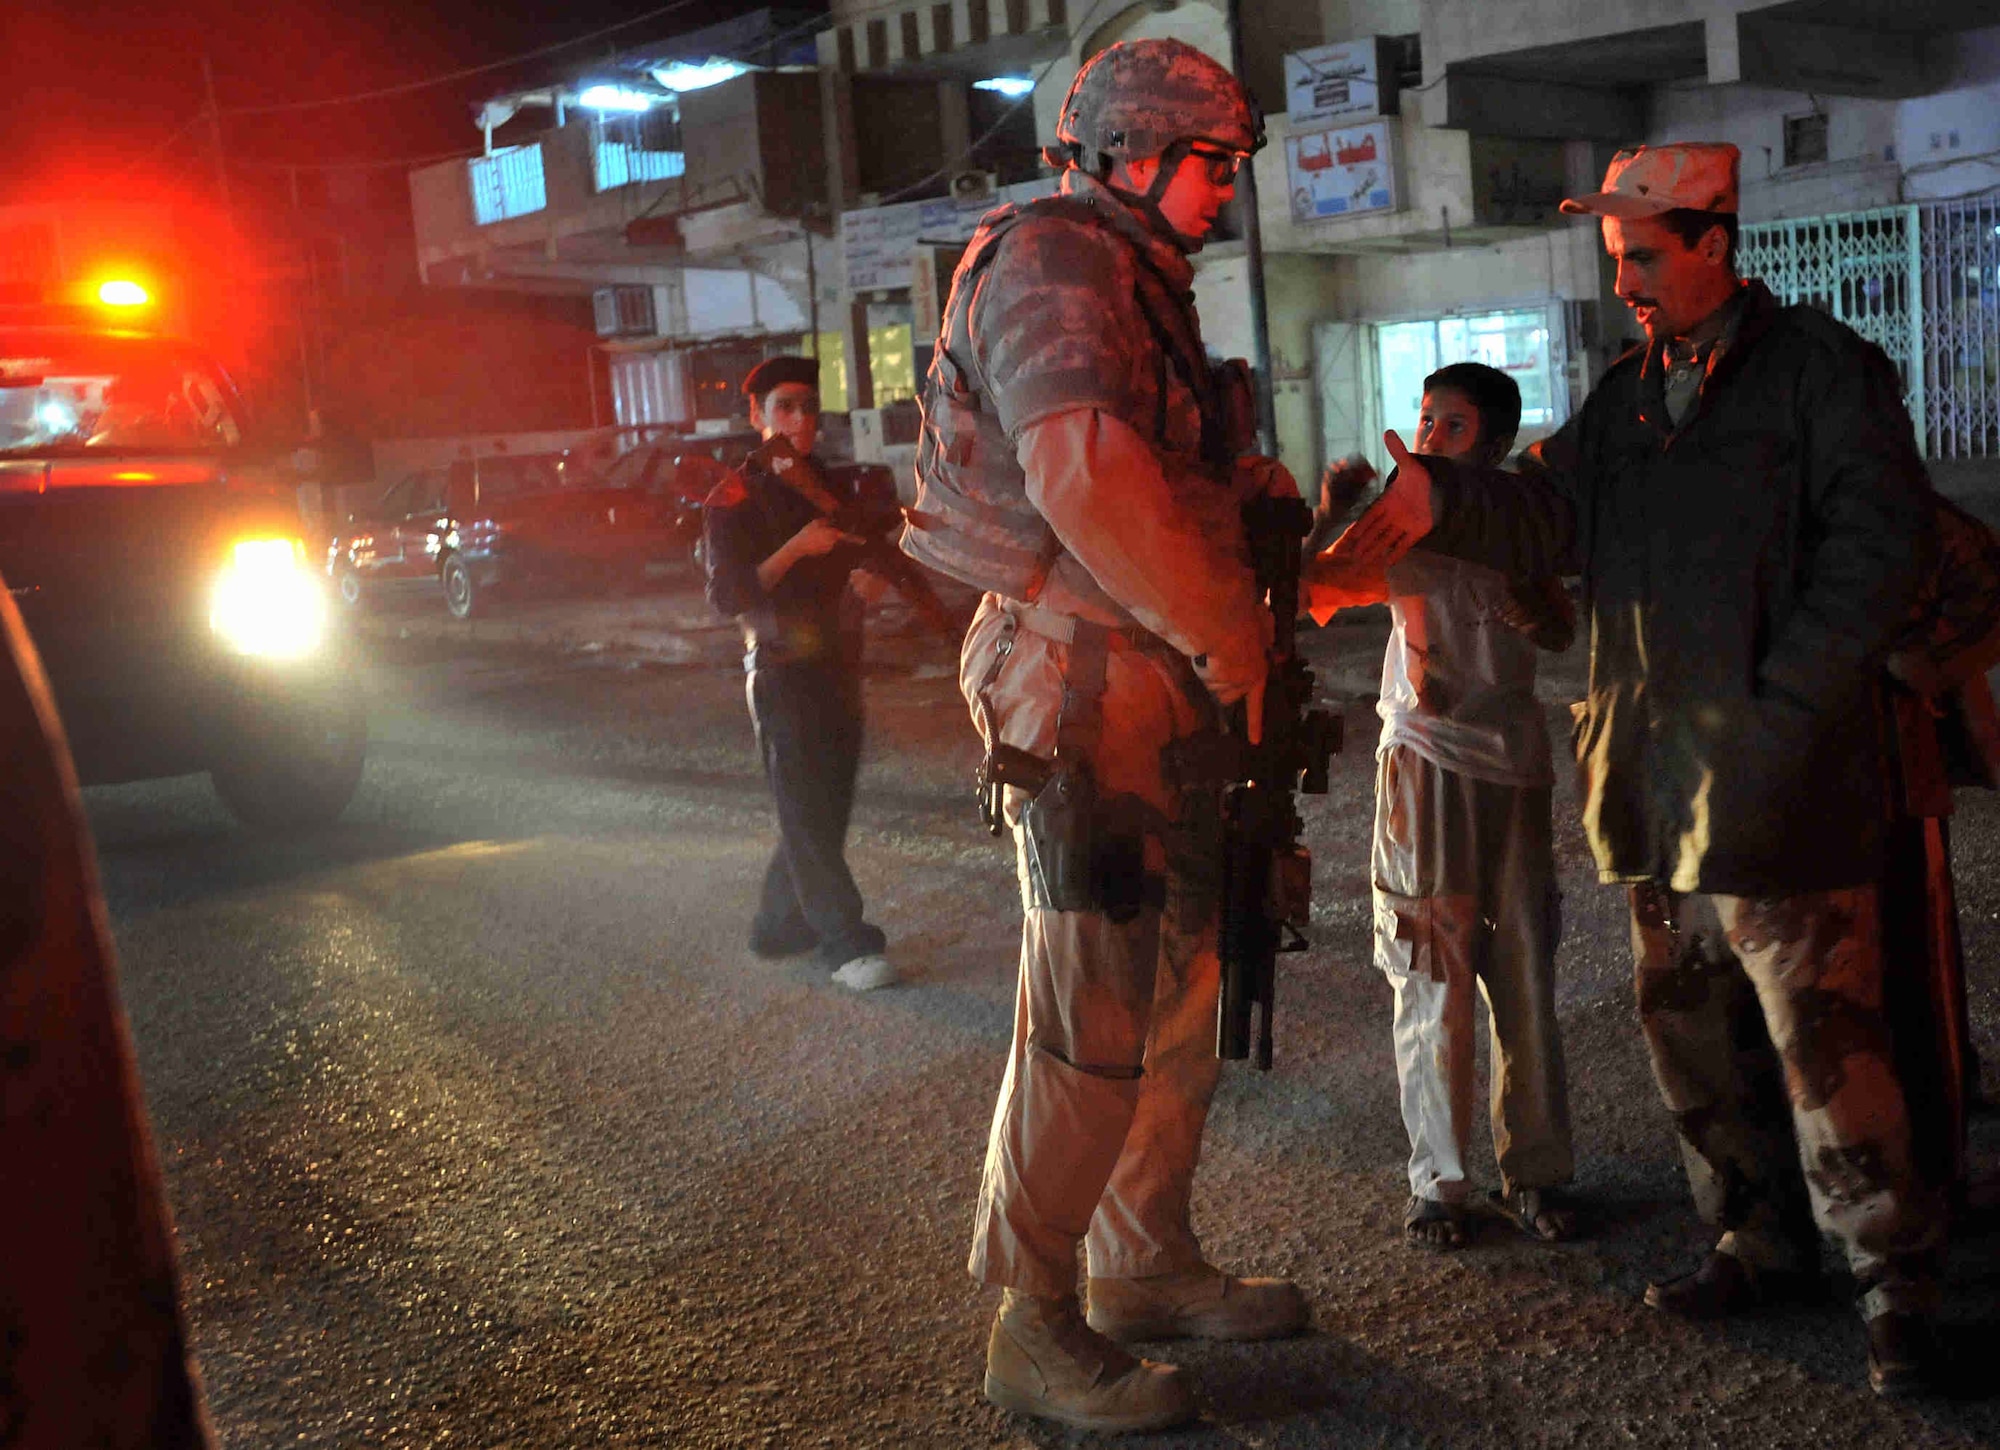 Staff Sgt. Davy Huffman speaks with a Sons Of Iraq soldier during a night-time patrol along the 60th Street Market area meeting Iraqi civilians, handing out toys to the children and speaking with local business owners November 2008 in the Al Doura community located in southern Baghdad, Iraq. The Airman is assigned to Detachment 3, 732nd Expeditionary Security Forces Squadron with the 716th Military Police Battalion. (U.S. Navy photo/Petty Officer 2nd Class Todd Frantom) 